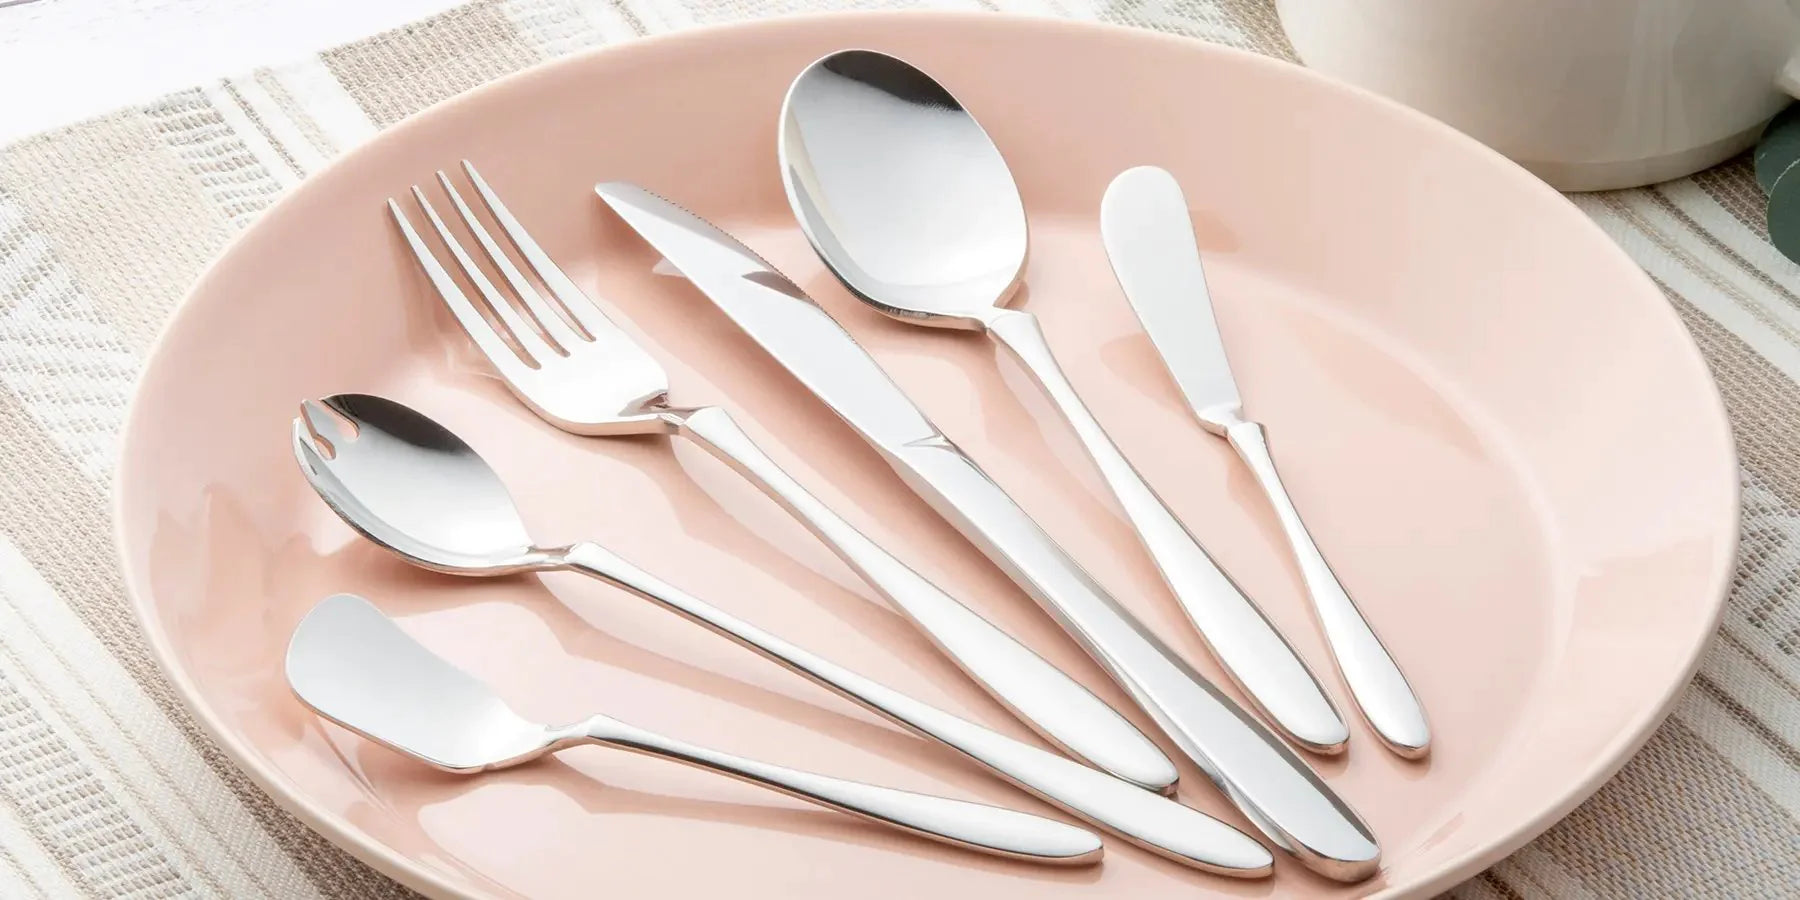 Discover our great selection of Spoons at Globalkitchen Japan.